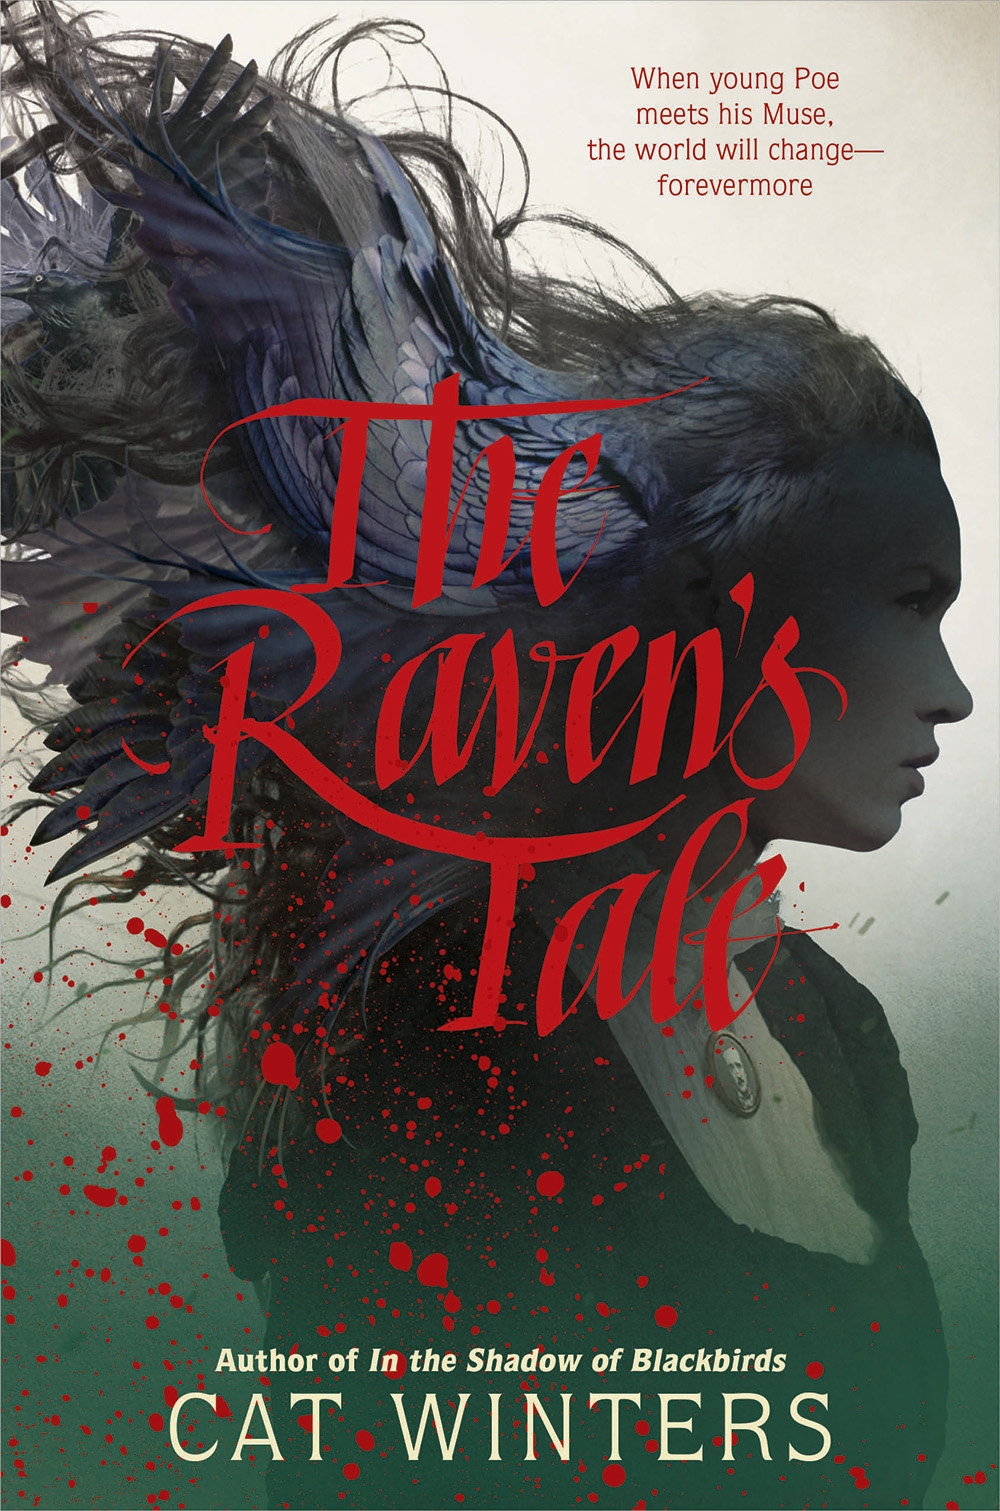 The Raven's Tale by Cat Winters